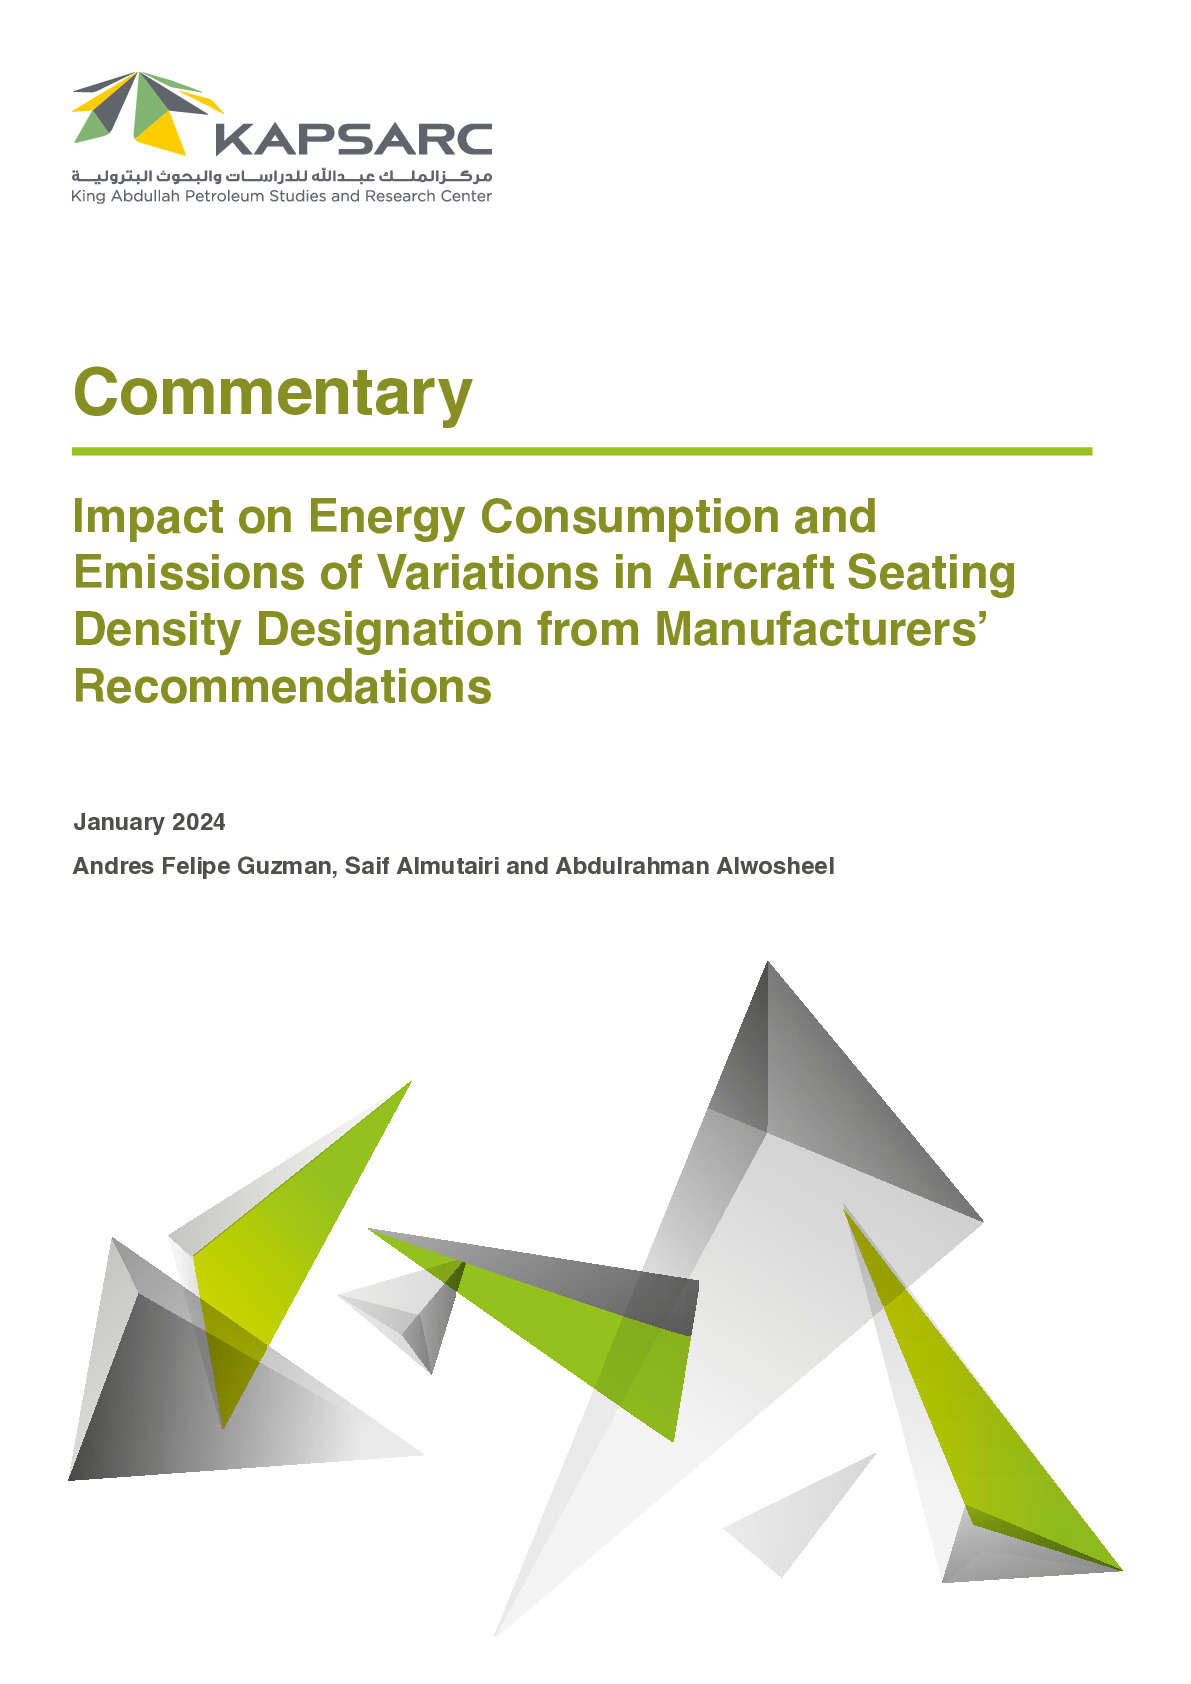 Impact on Energy Consumption and Emissions of Variations in Aircraft Seating Density Designation from Manufacturers’ Recommendations